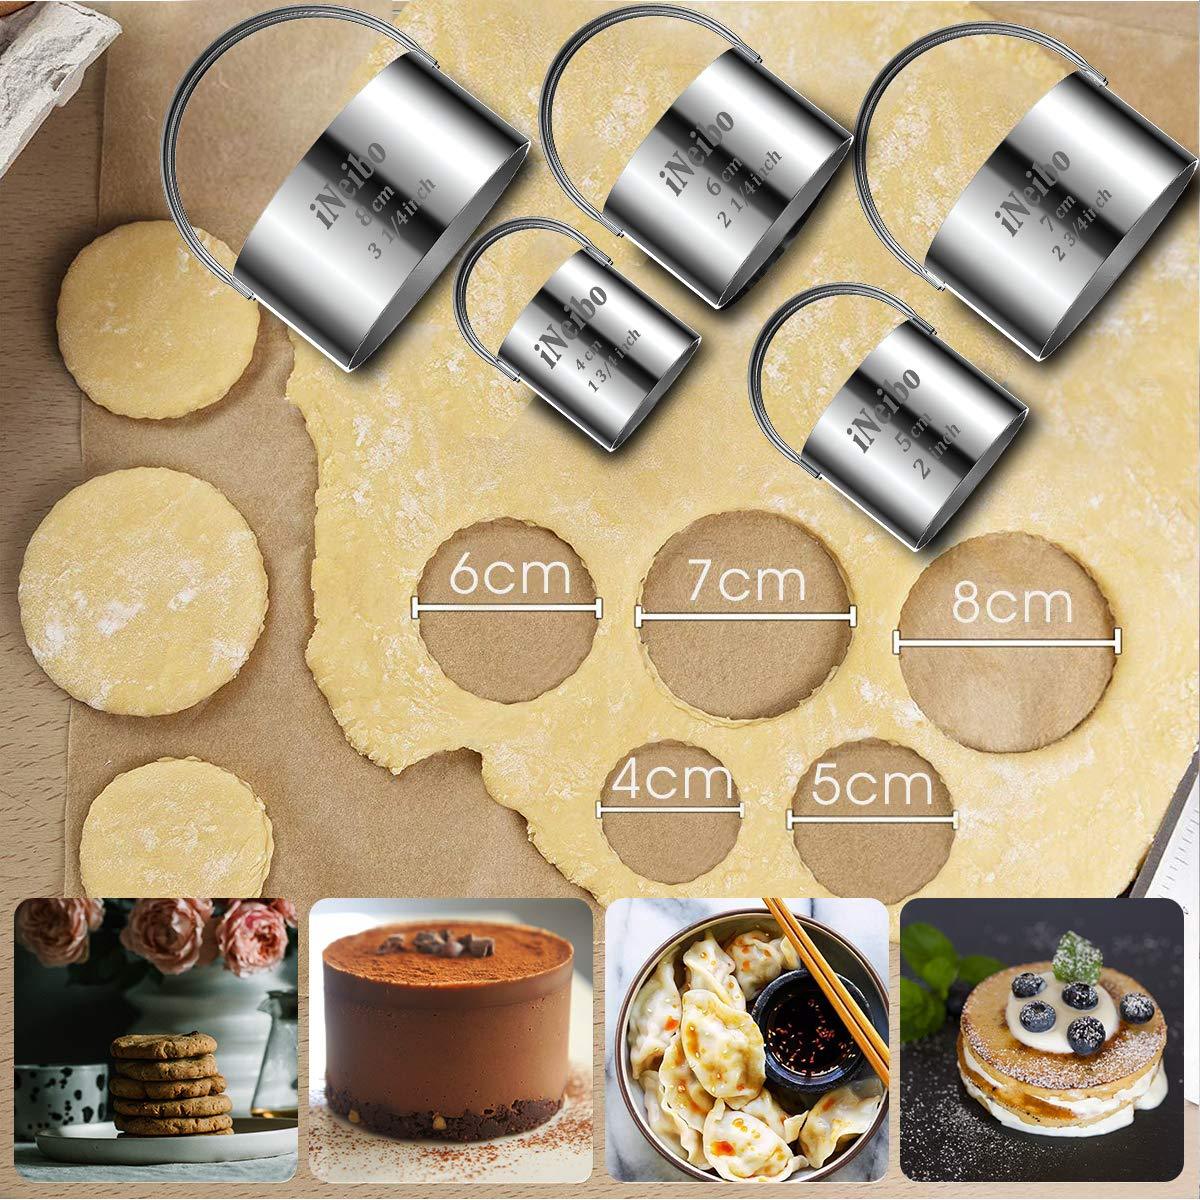 iNeibo Professional Baking Tools Biscuit Cutter Set Dough Blender/Cutter Round Cookies Cutter with Handle + Pastry Scraper+Egg Separator Heavy Duty Baking Dough Tools Pastry Utensils (Baking Tools) - CookCave